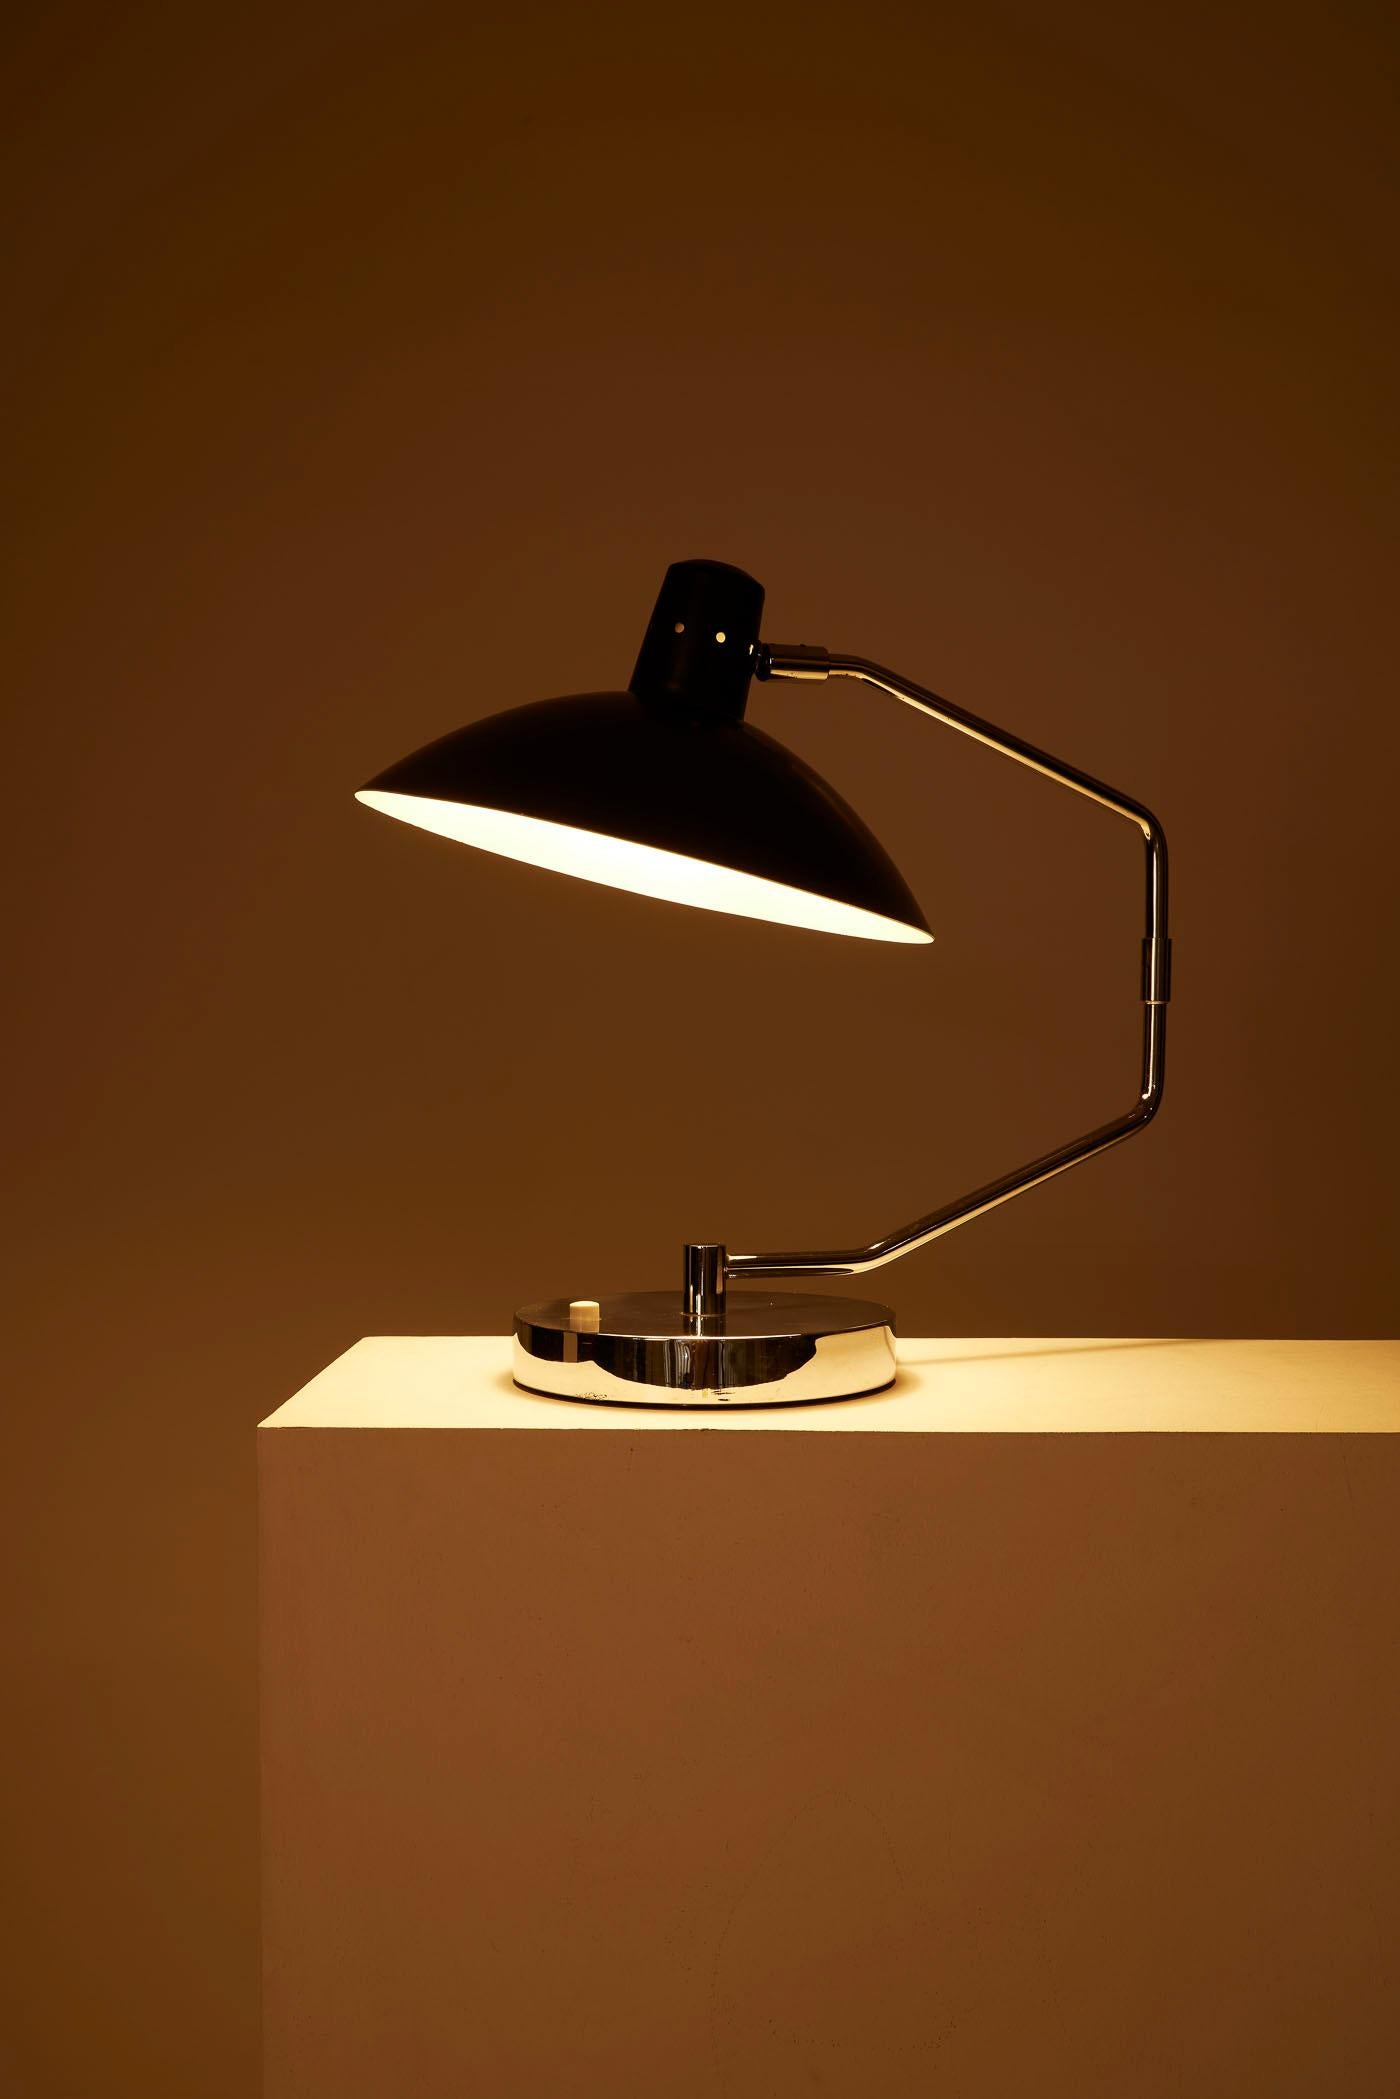 Table lamp from the designer Clay Mitchie for Knoll. It features a black lacquered metal reflector, a brushed metal arm, and a weighted base. The reflector is adjustable according to preferences. In perfect condition.
DV439